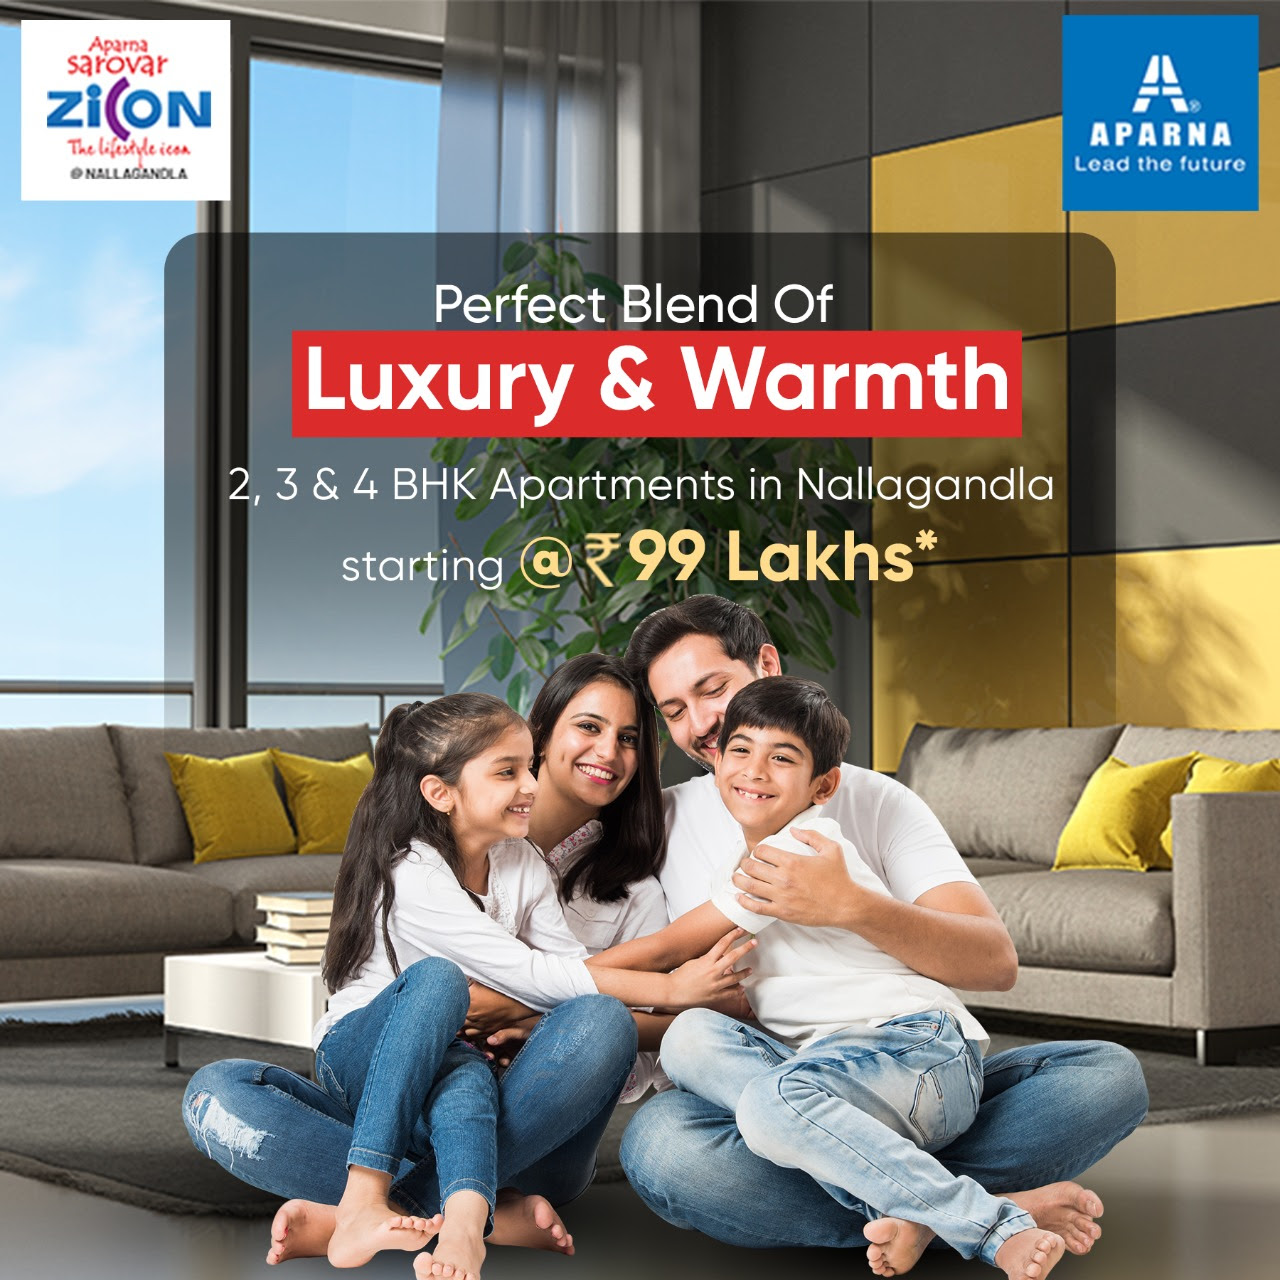 Book 2, 3 and 4 BHK apartments Rs 99 Lac at Aparna Sarovar Zicon, Hyderabad Update